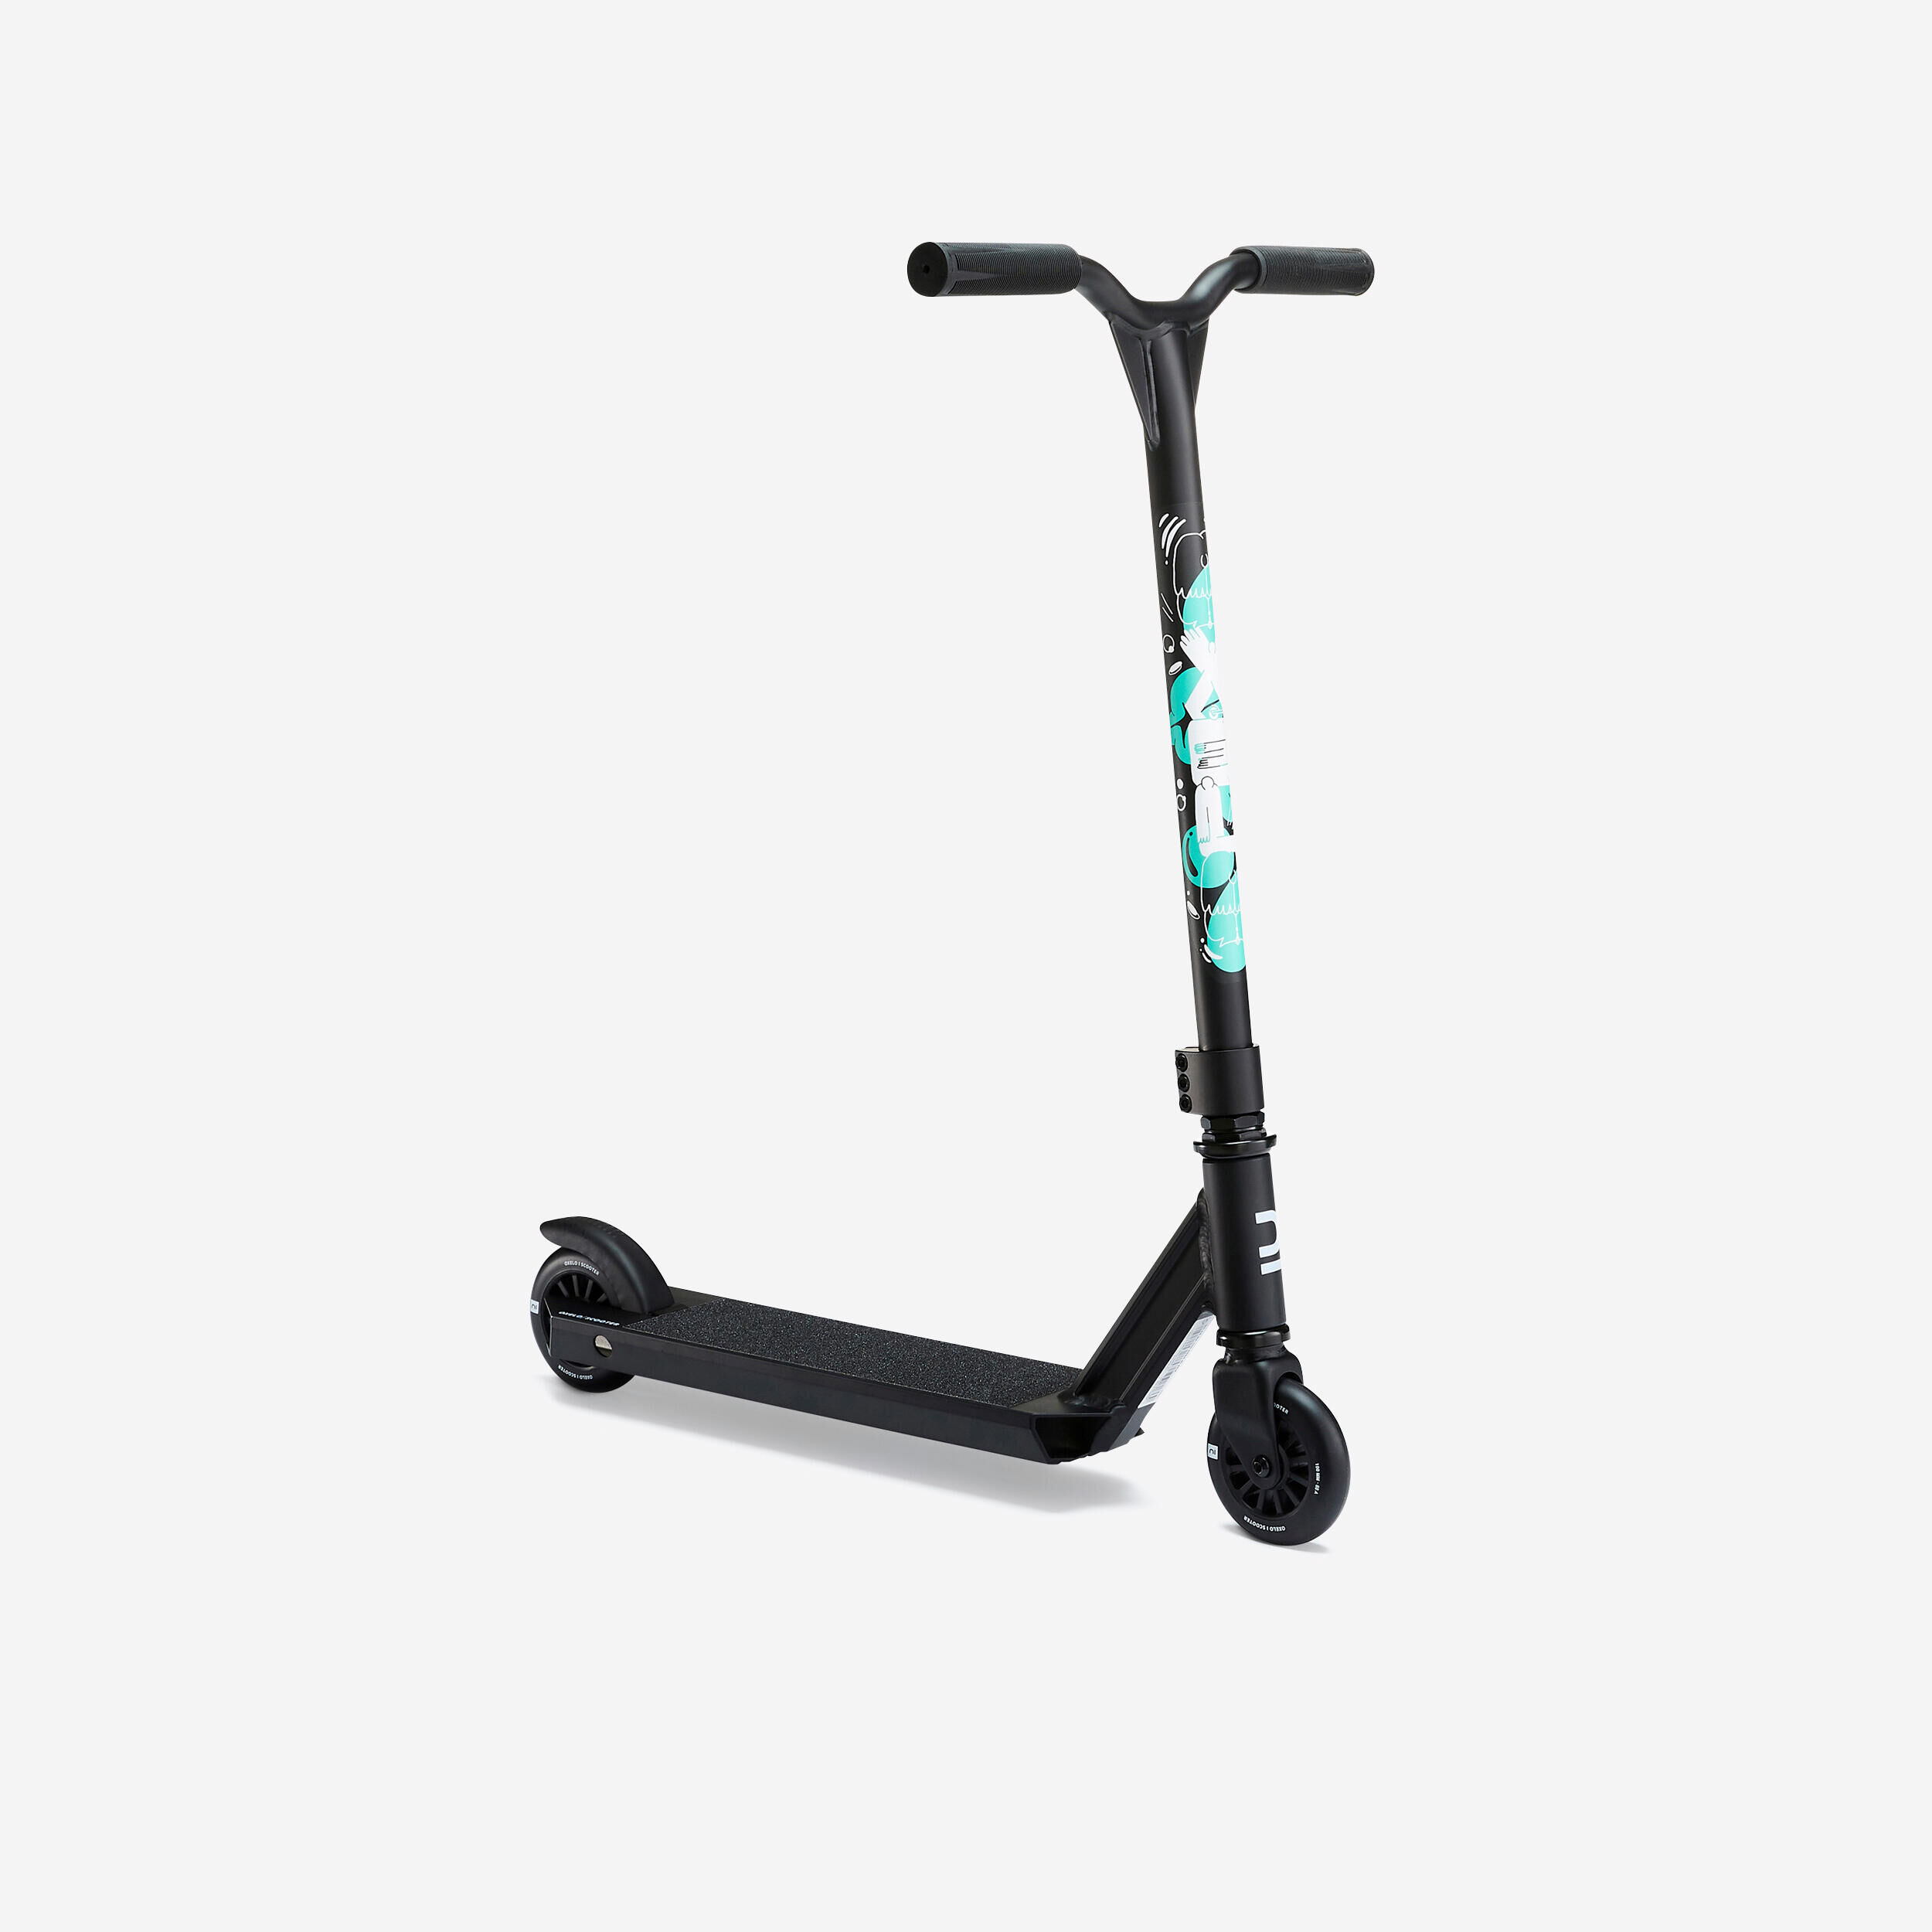 OXELO Freestyle Scooter MF100 - Black